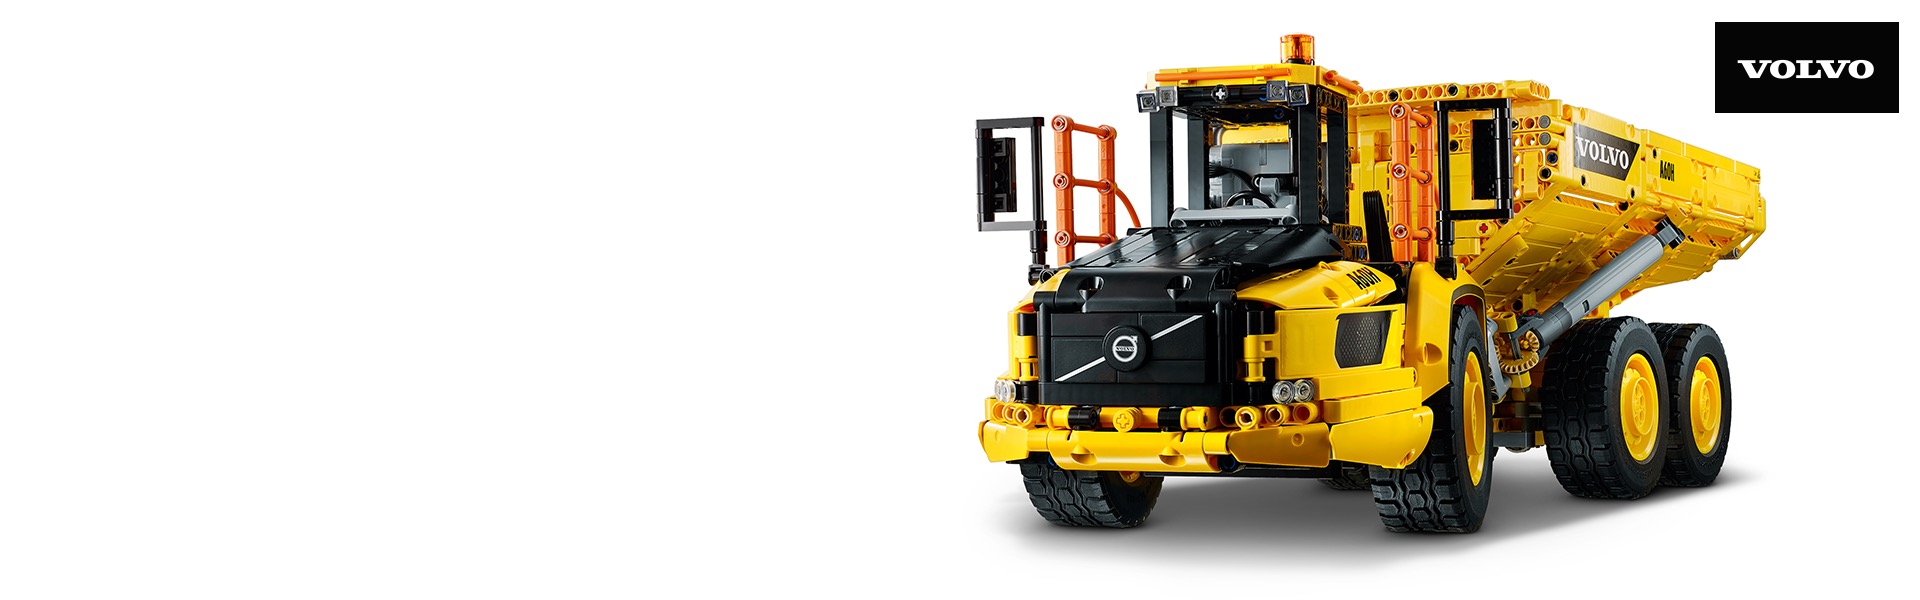 6x6 Volvo Articulated Hauler 42114 | Technic™ | Buy online at the 